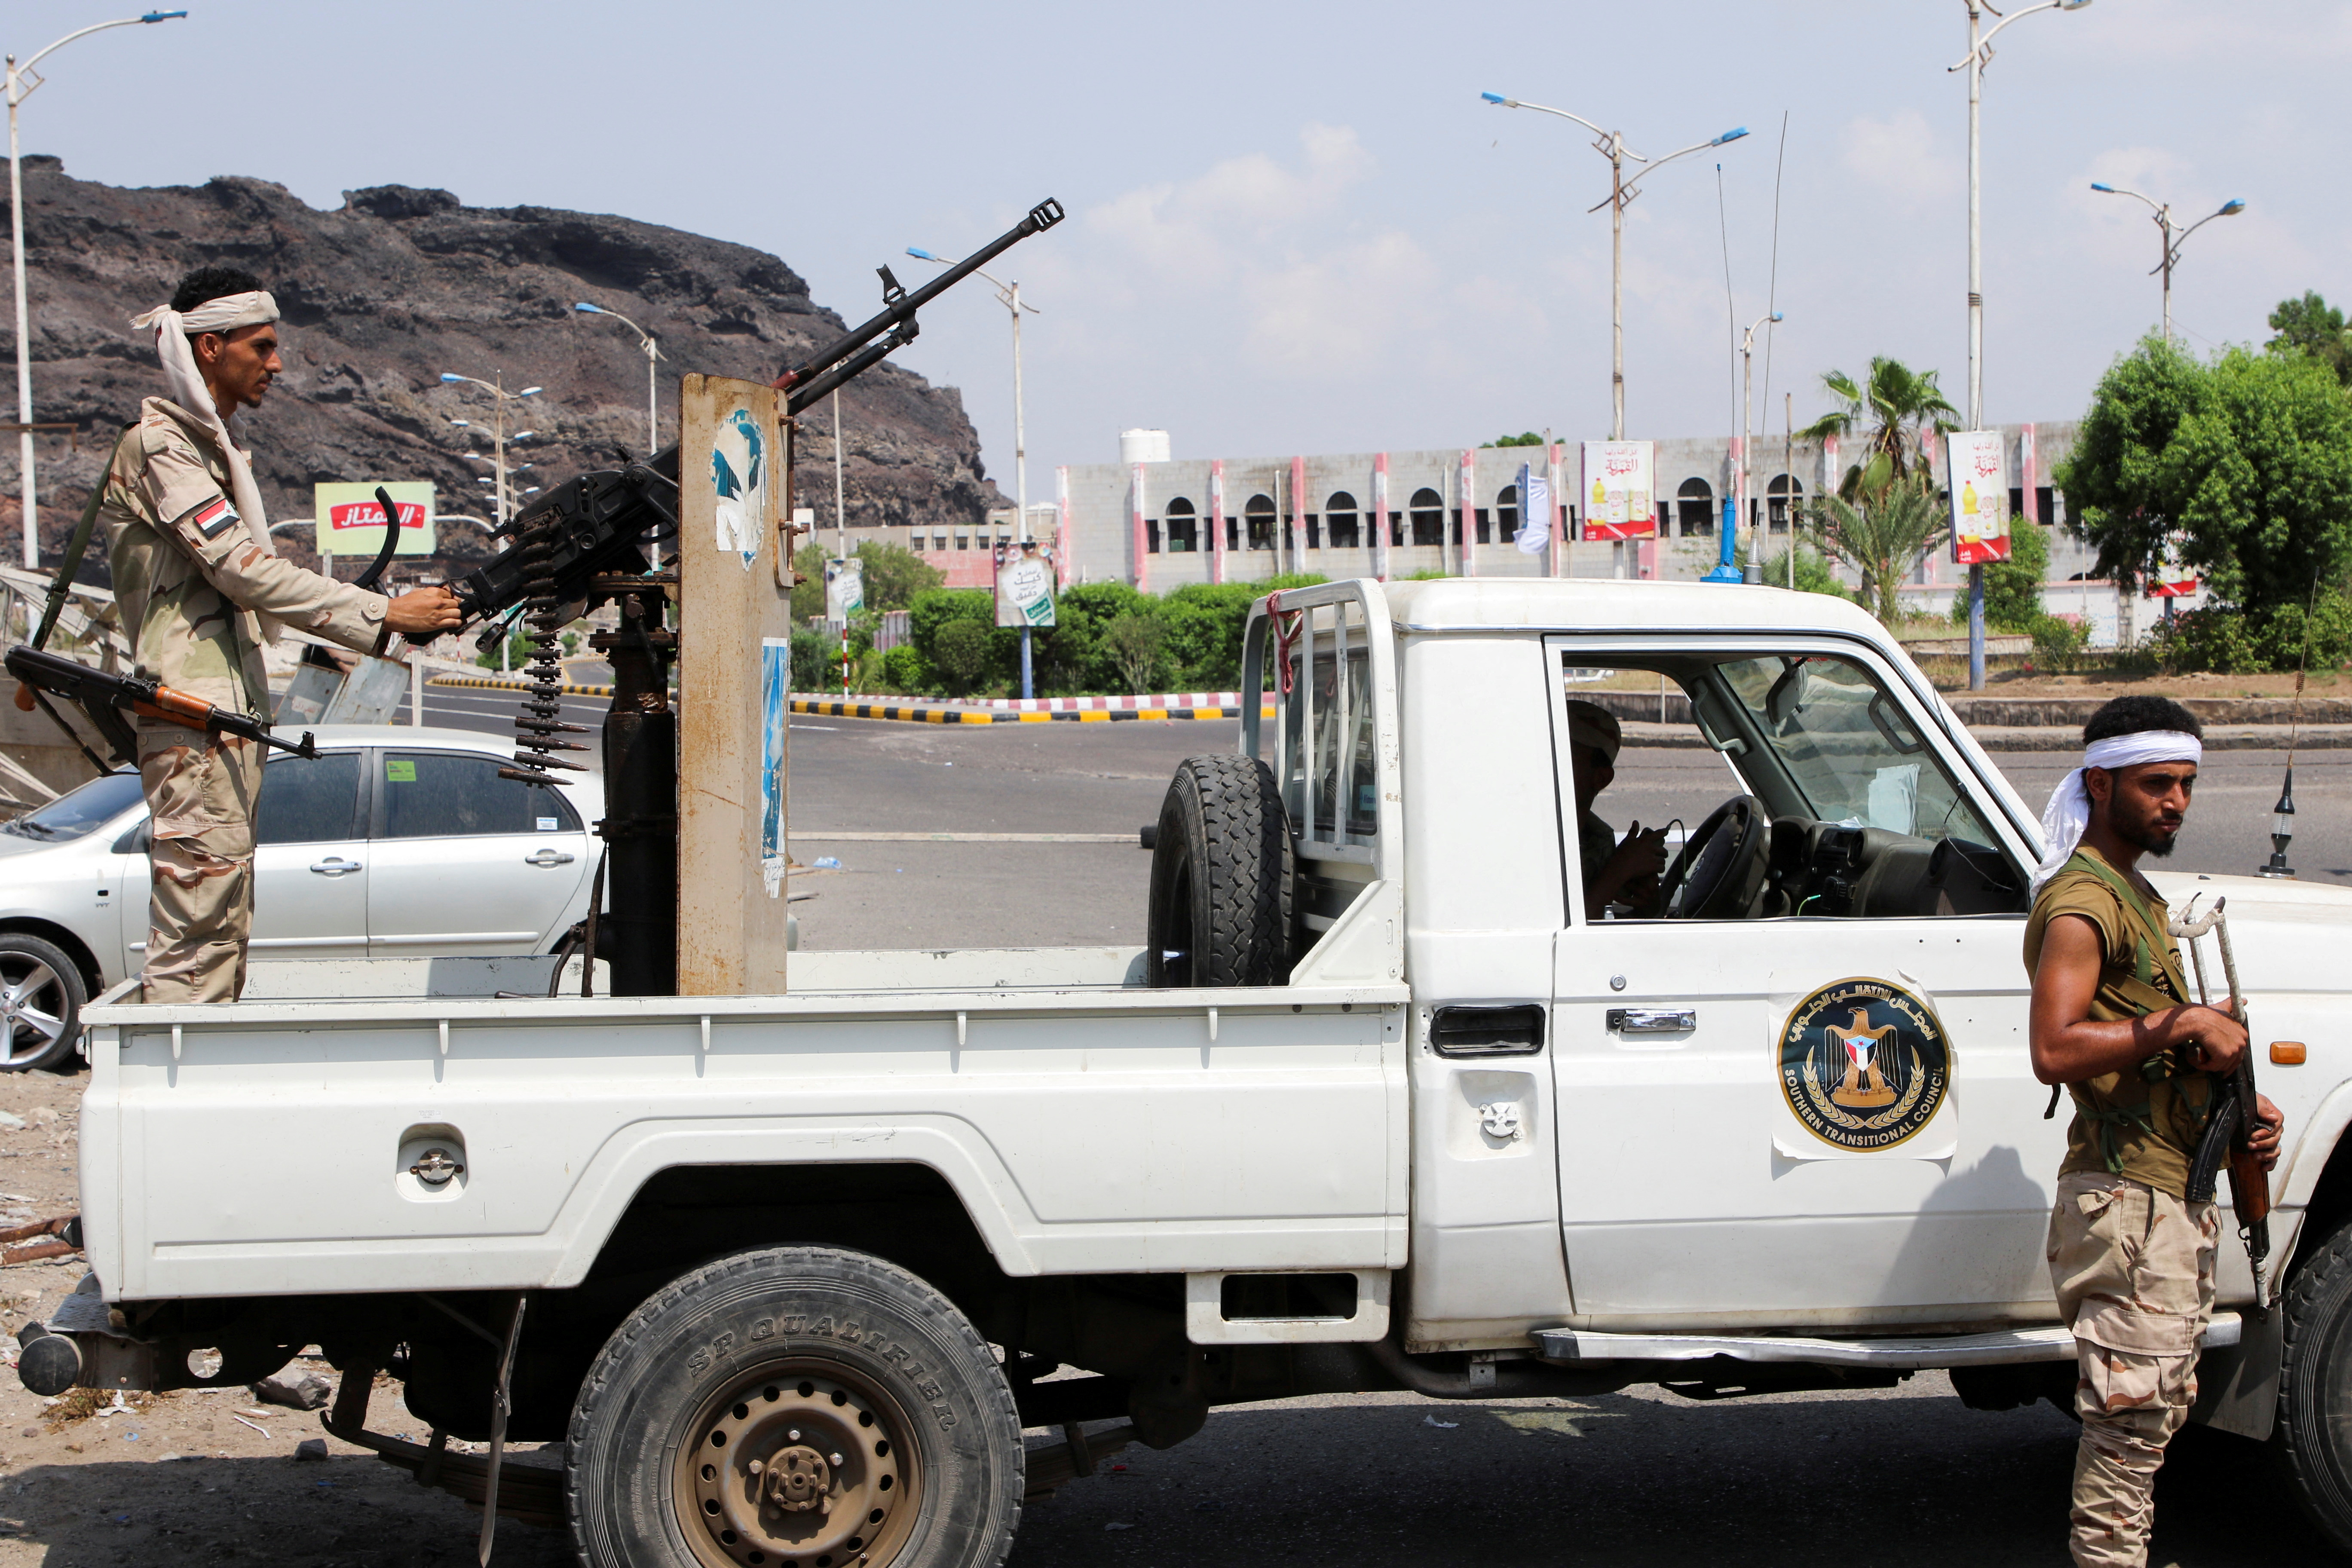 Members of the separatist Southern Transitional Council (STC) mans a checkpoint in Aden